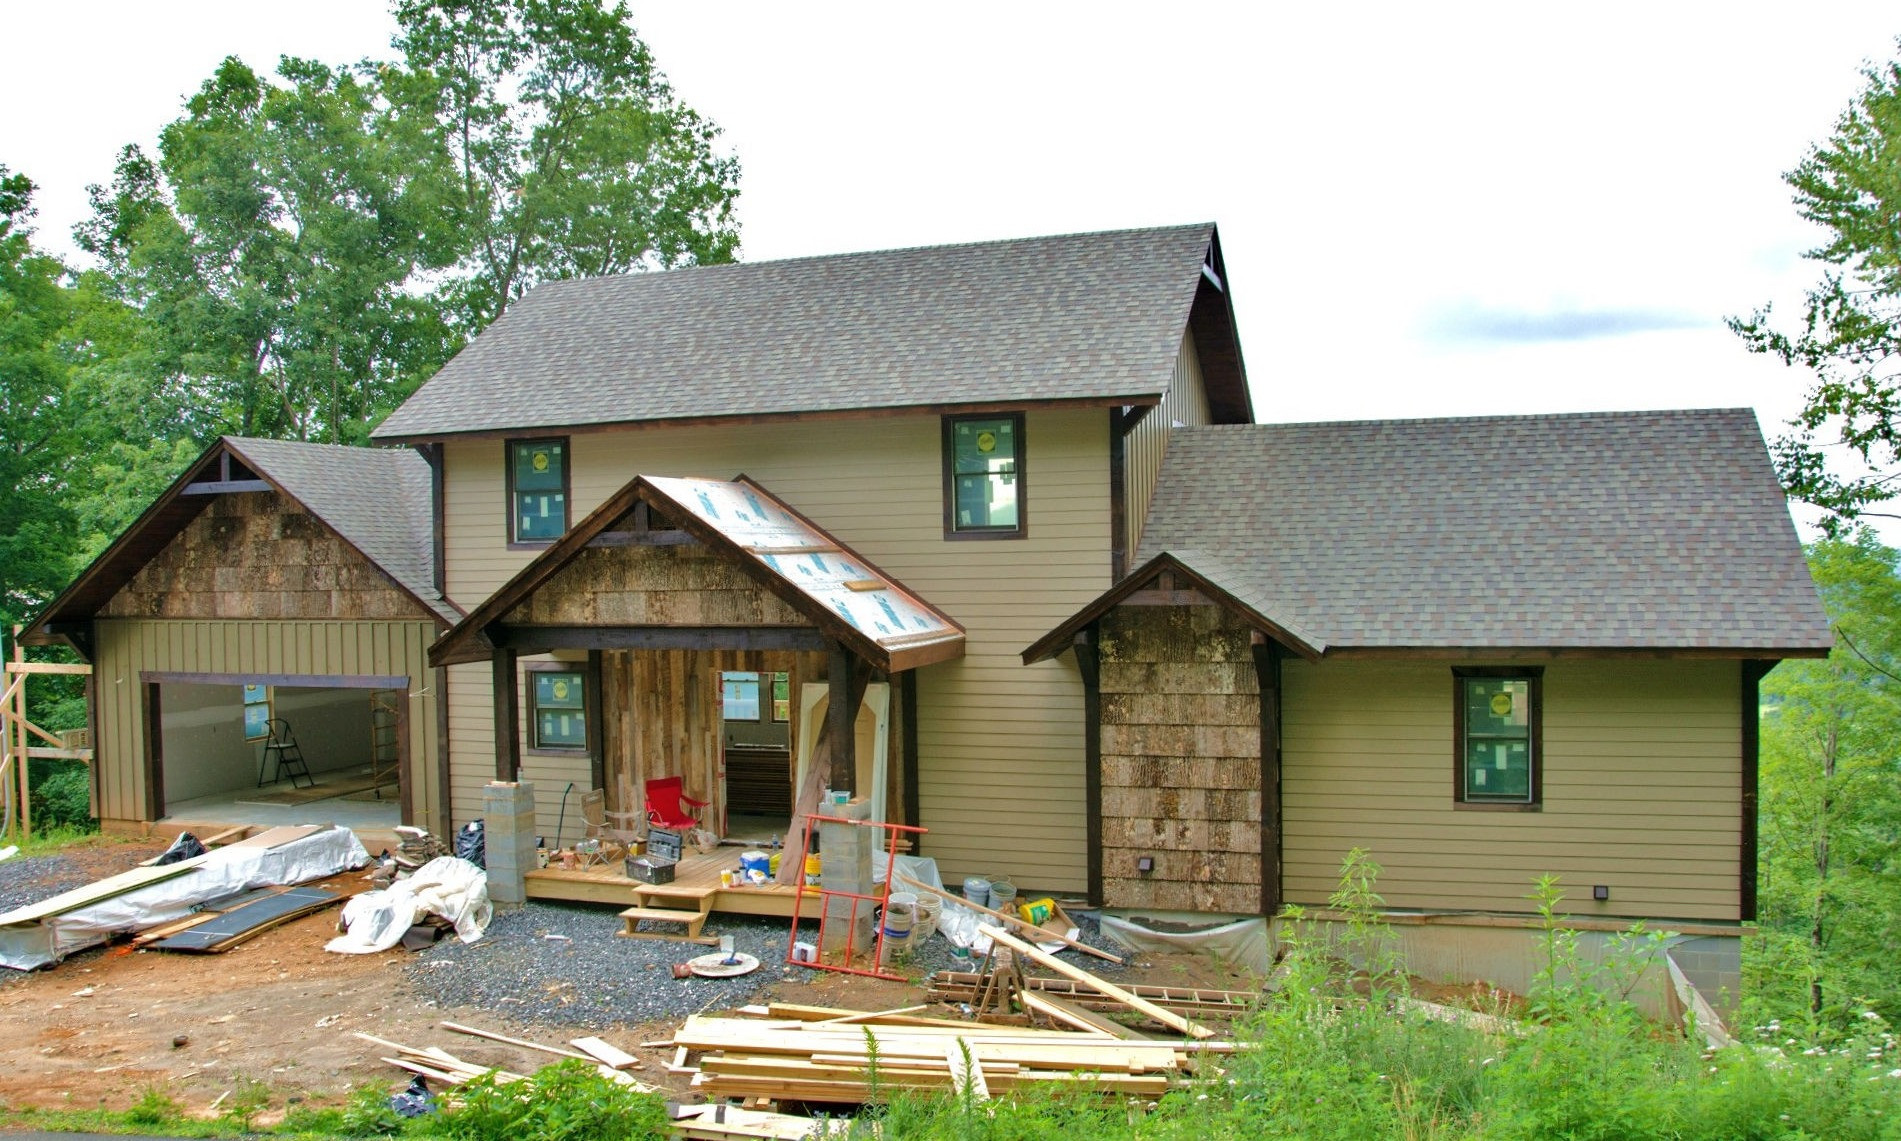 ENJOY QUALITY CRAFTSMANSHIP and magnificent long range mountain views with this new Adirondack style Blue Ridge Mountain home,under construction, in Elk Ridge, a well established community in Southern Ashe County.